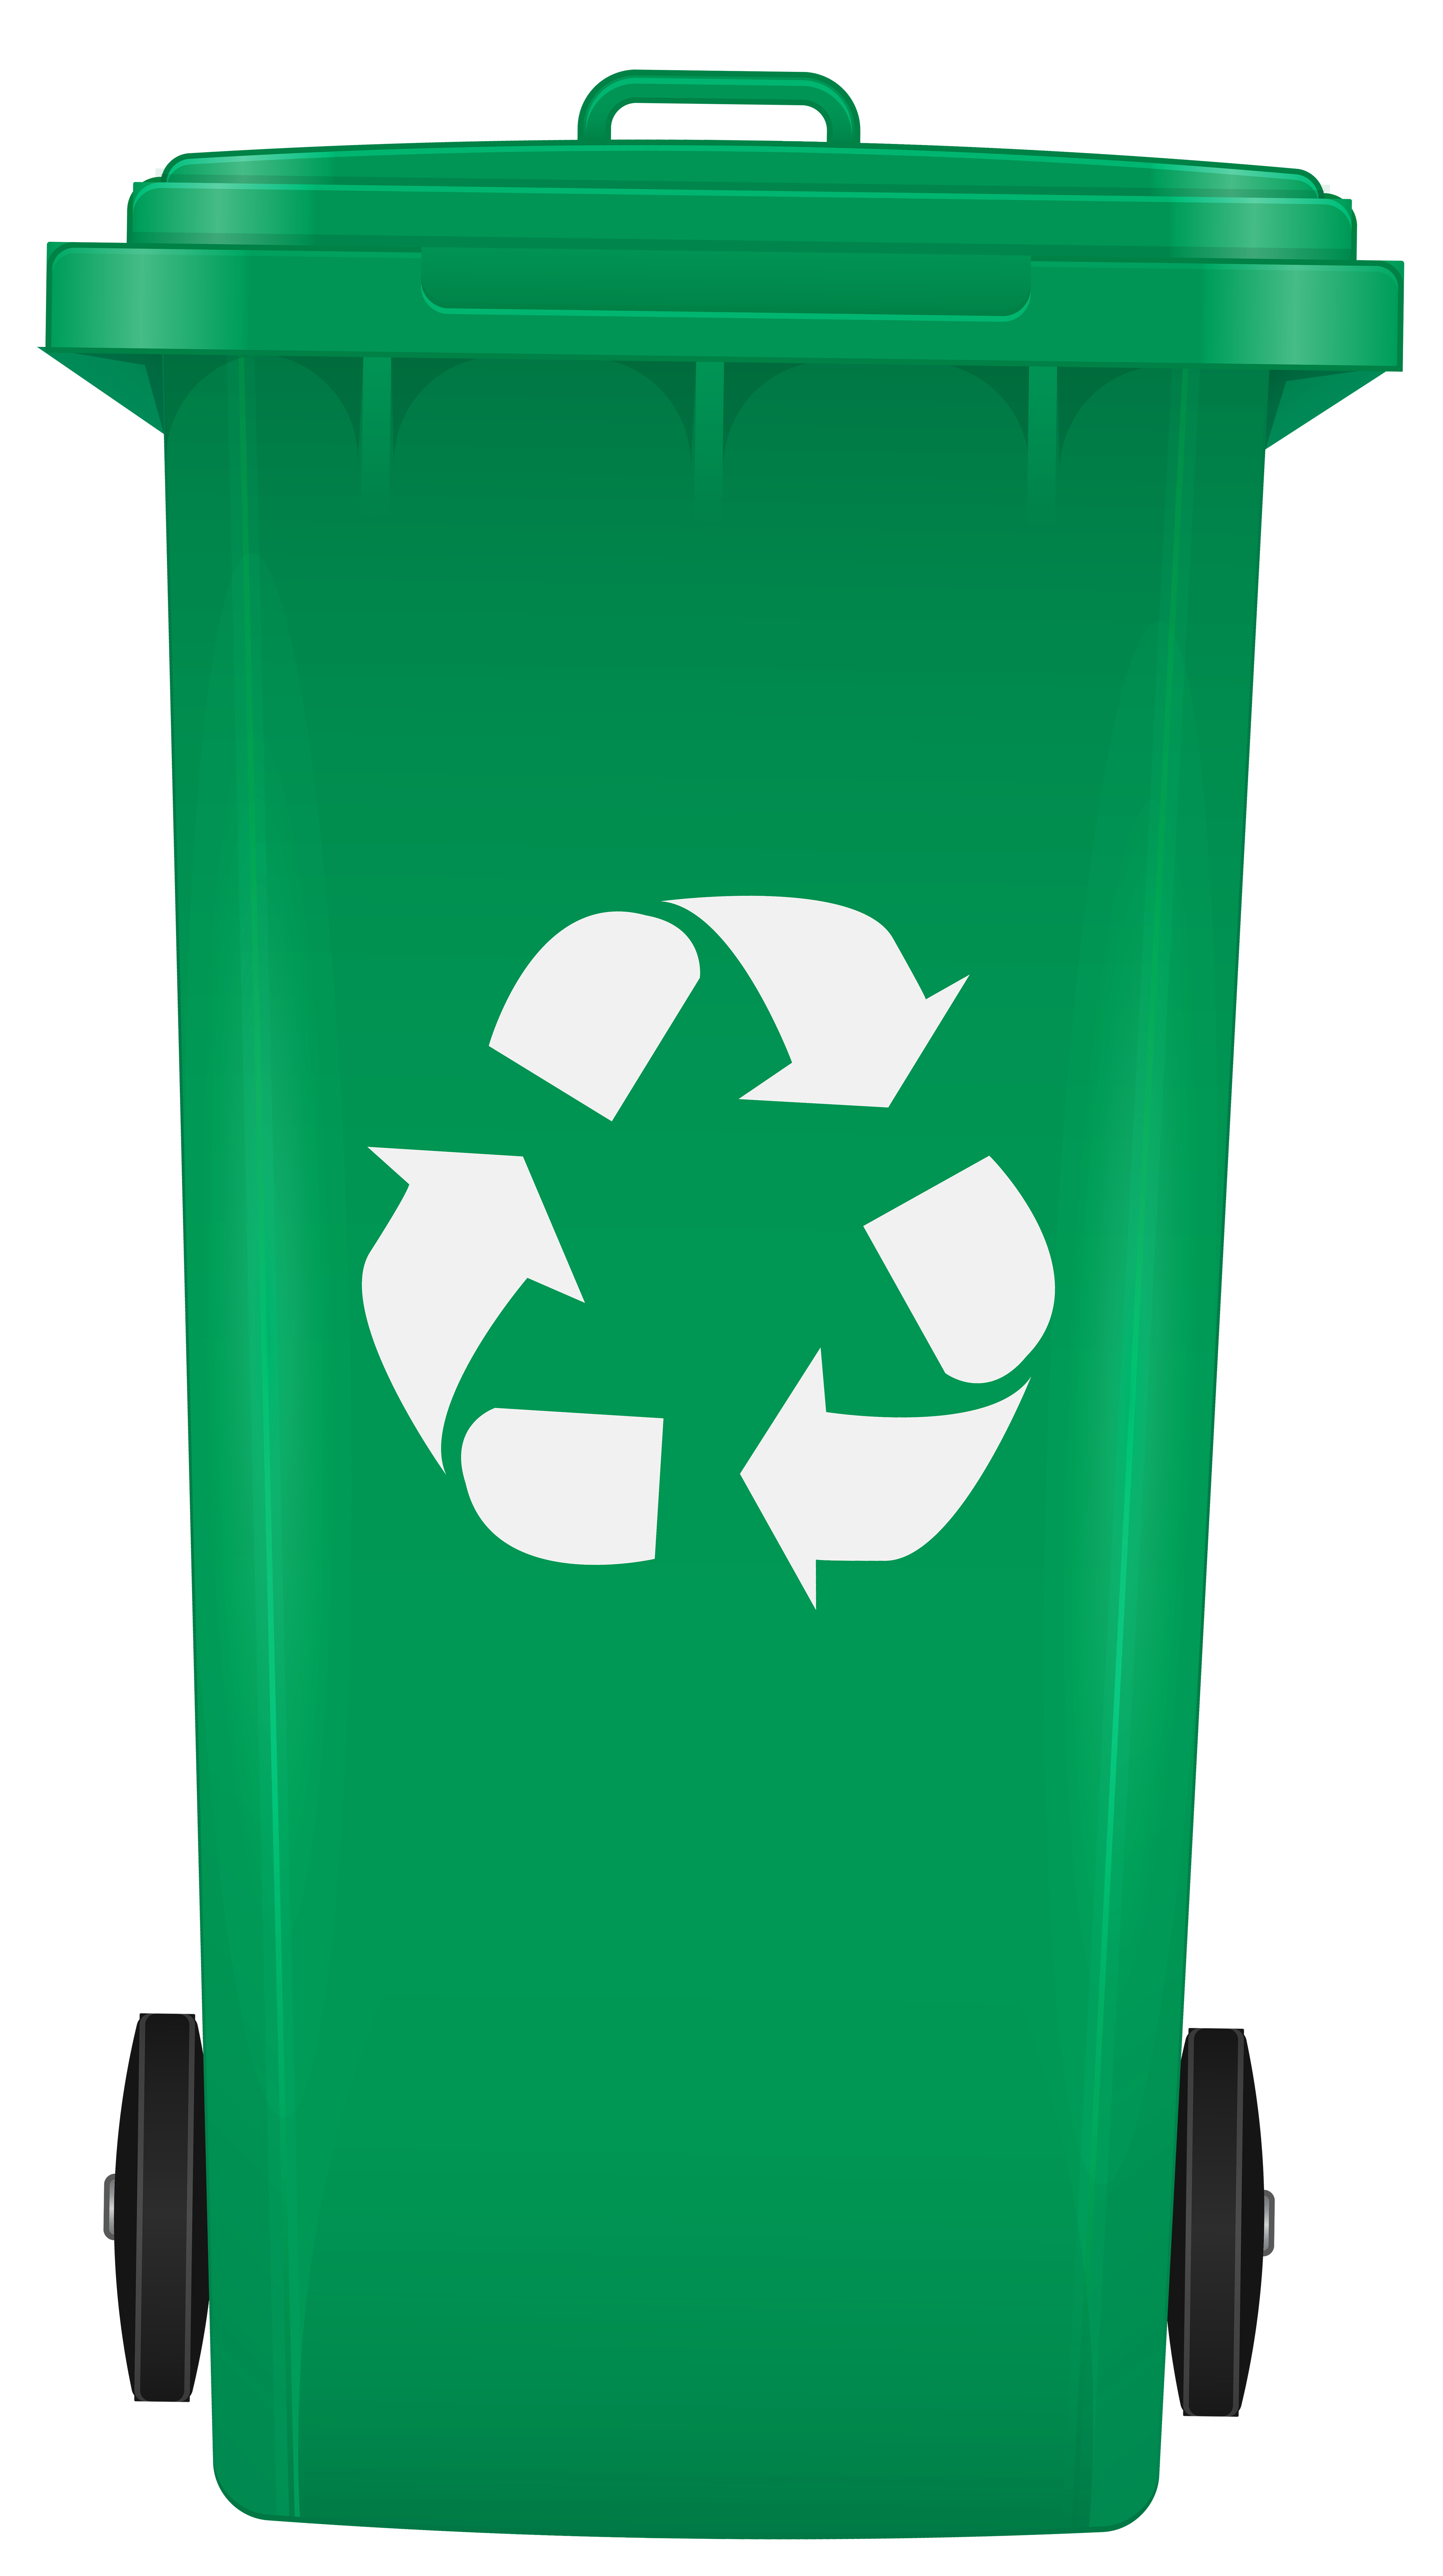 Green Recycling Plastic Waste Recycling Recycling Bins Vector Design ...